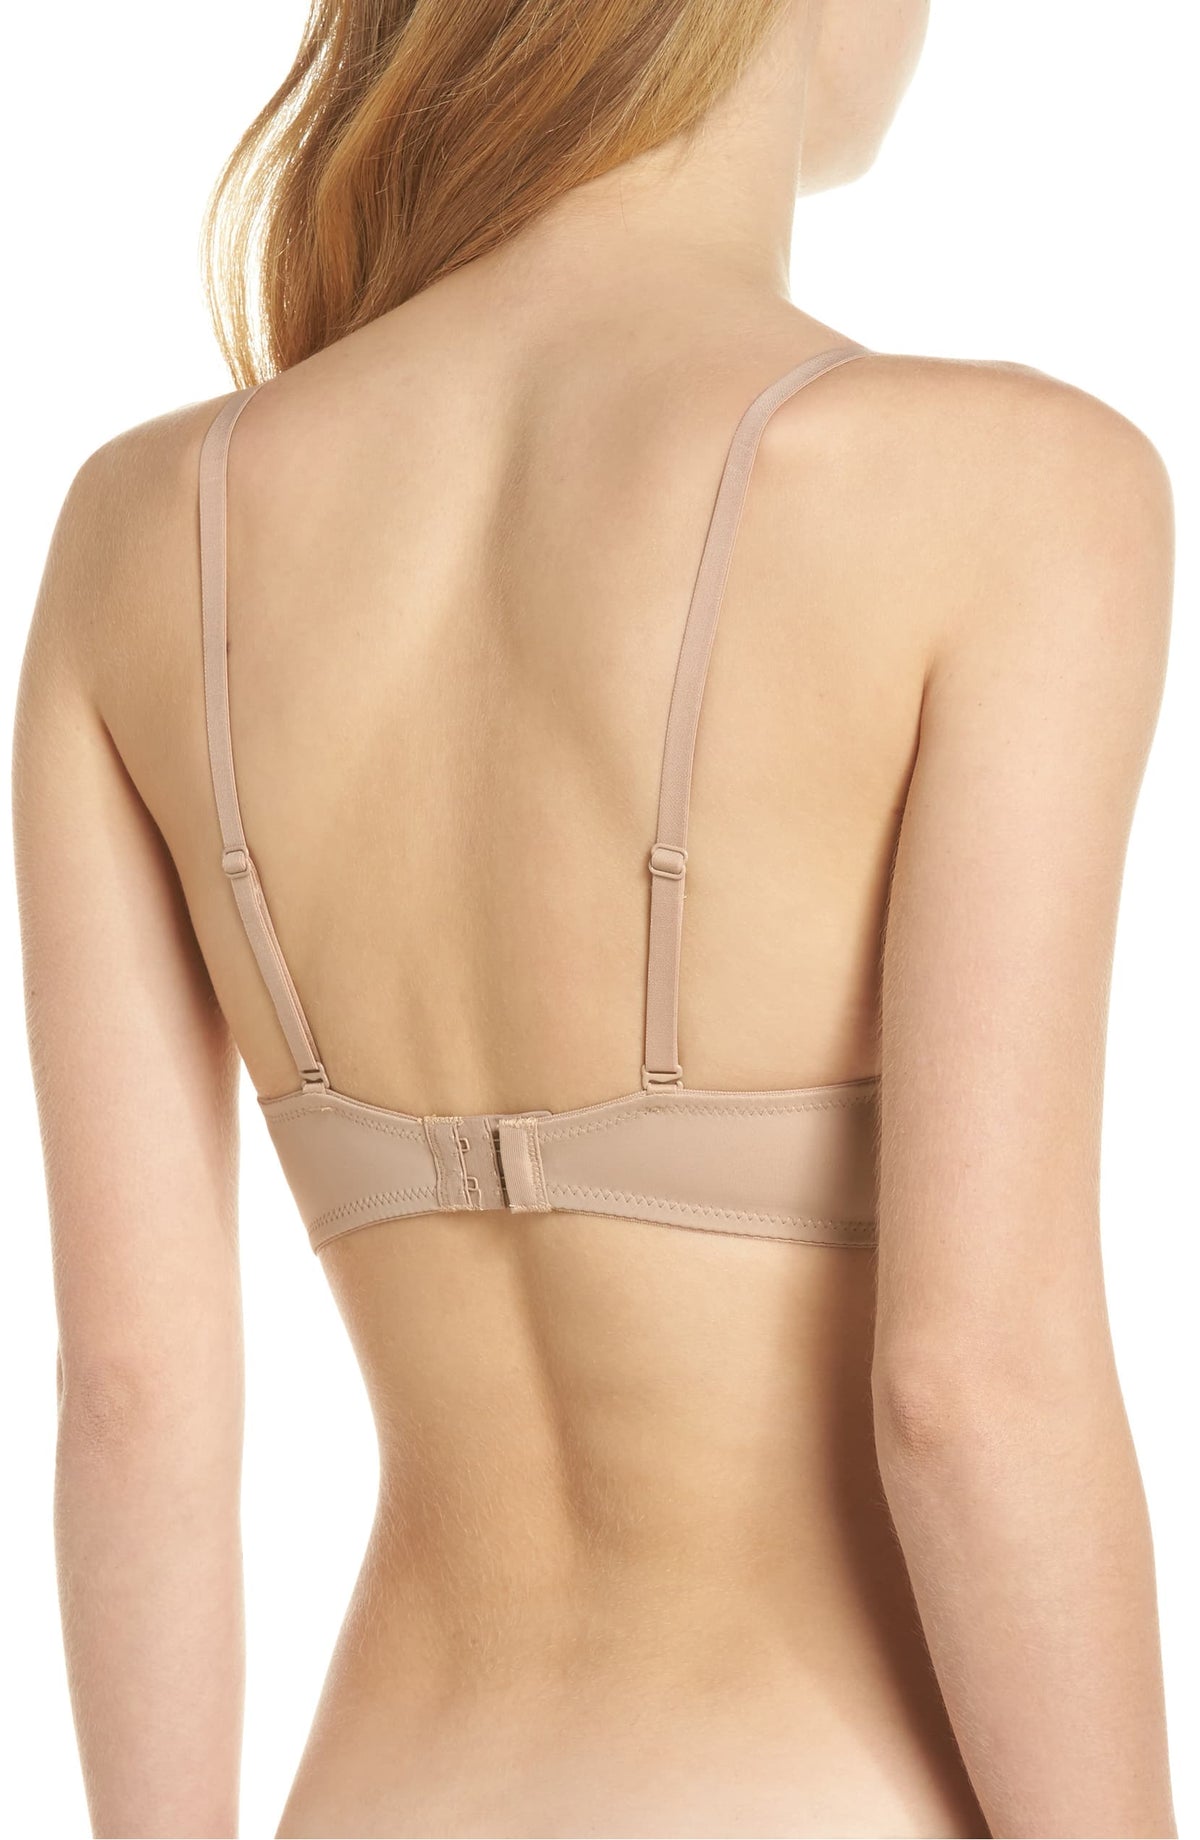 Fashion Forms Convertible U Plunge Bra GL674 Nude Rear View